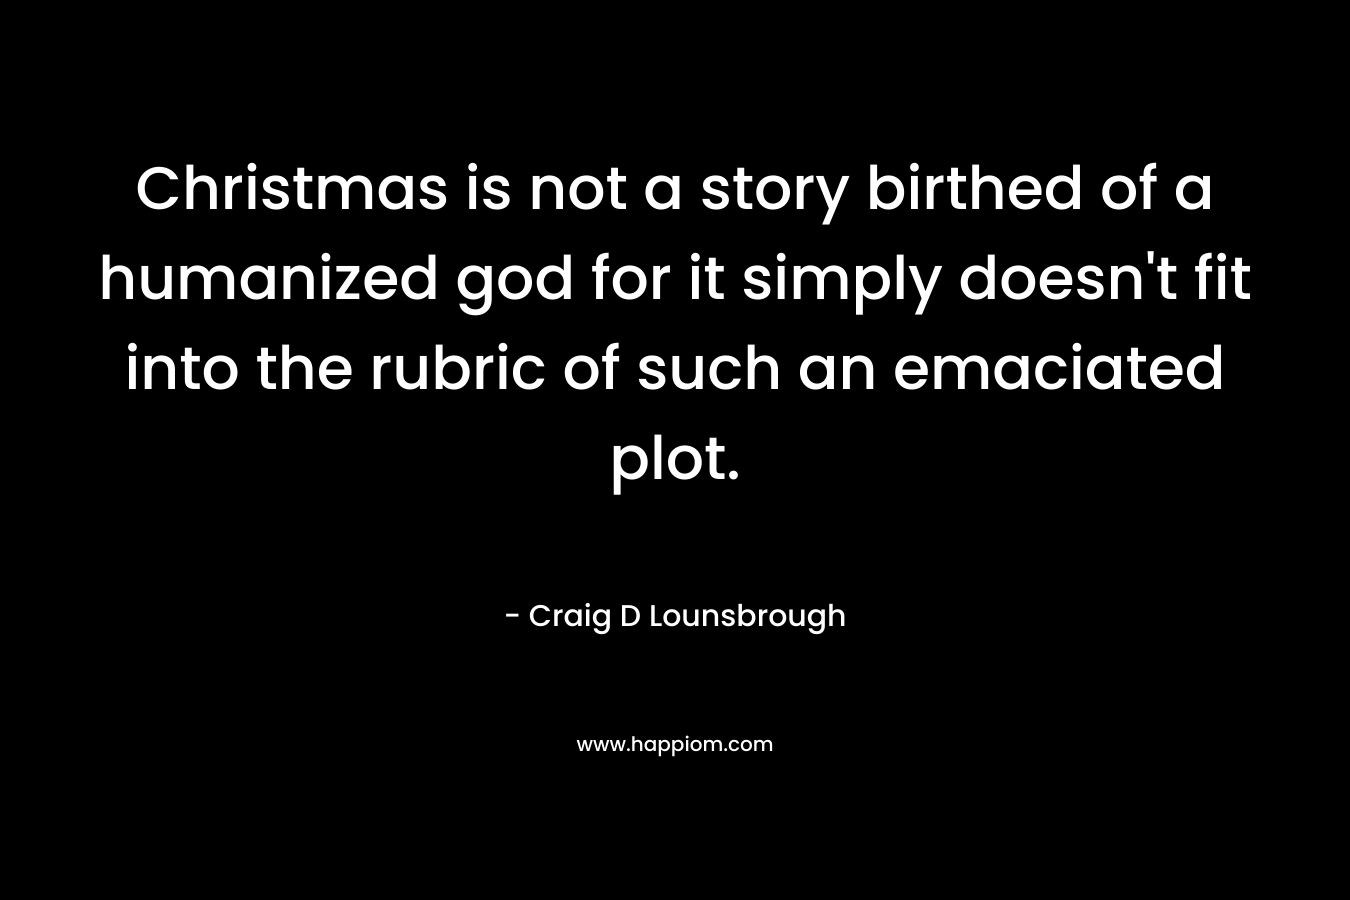 Christmas is not a story birthed of a humanized god for it simply doesn't fit into the rubric of such an emaciated plot.